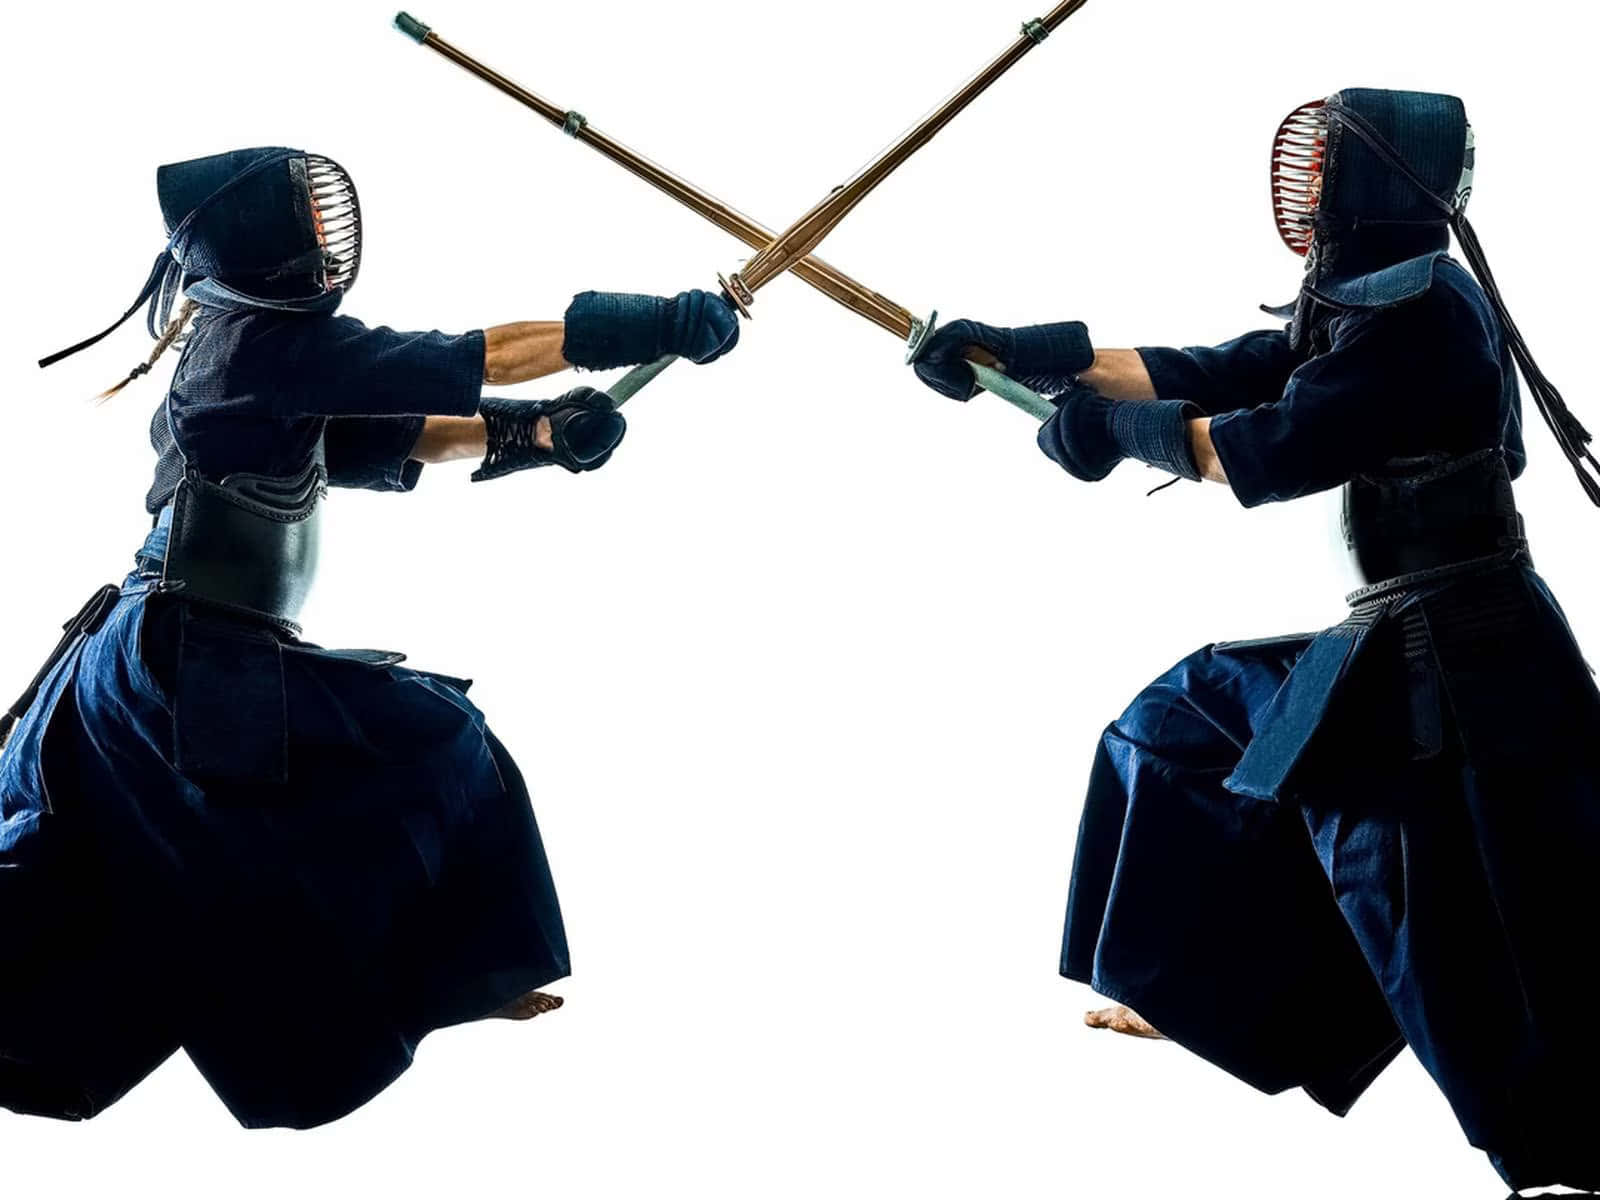 Two Ninjas In A Samurai Outfit Fighting